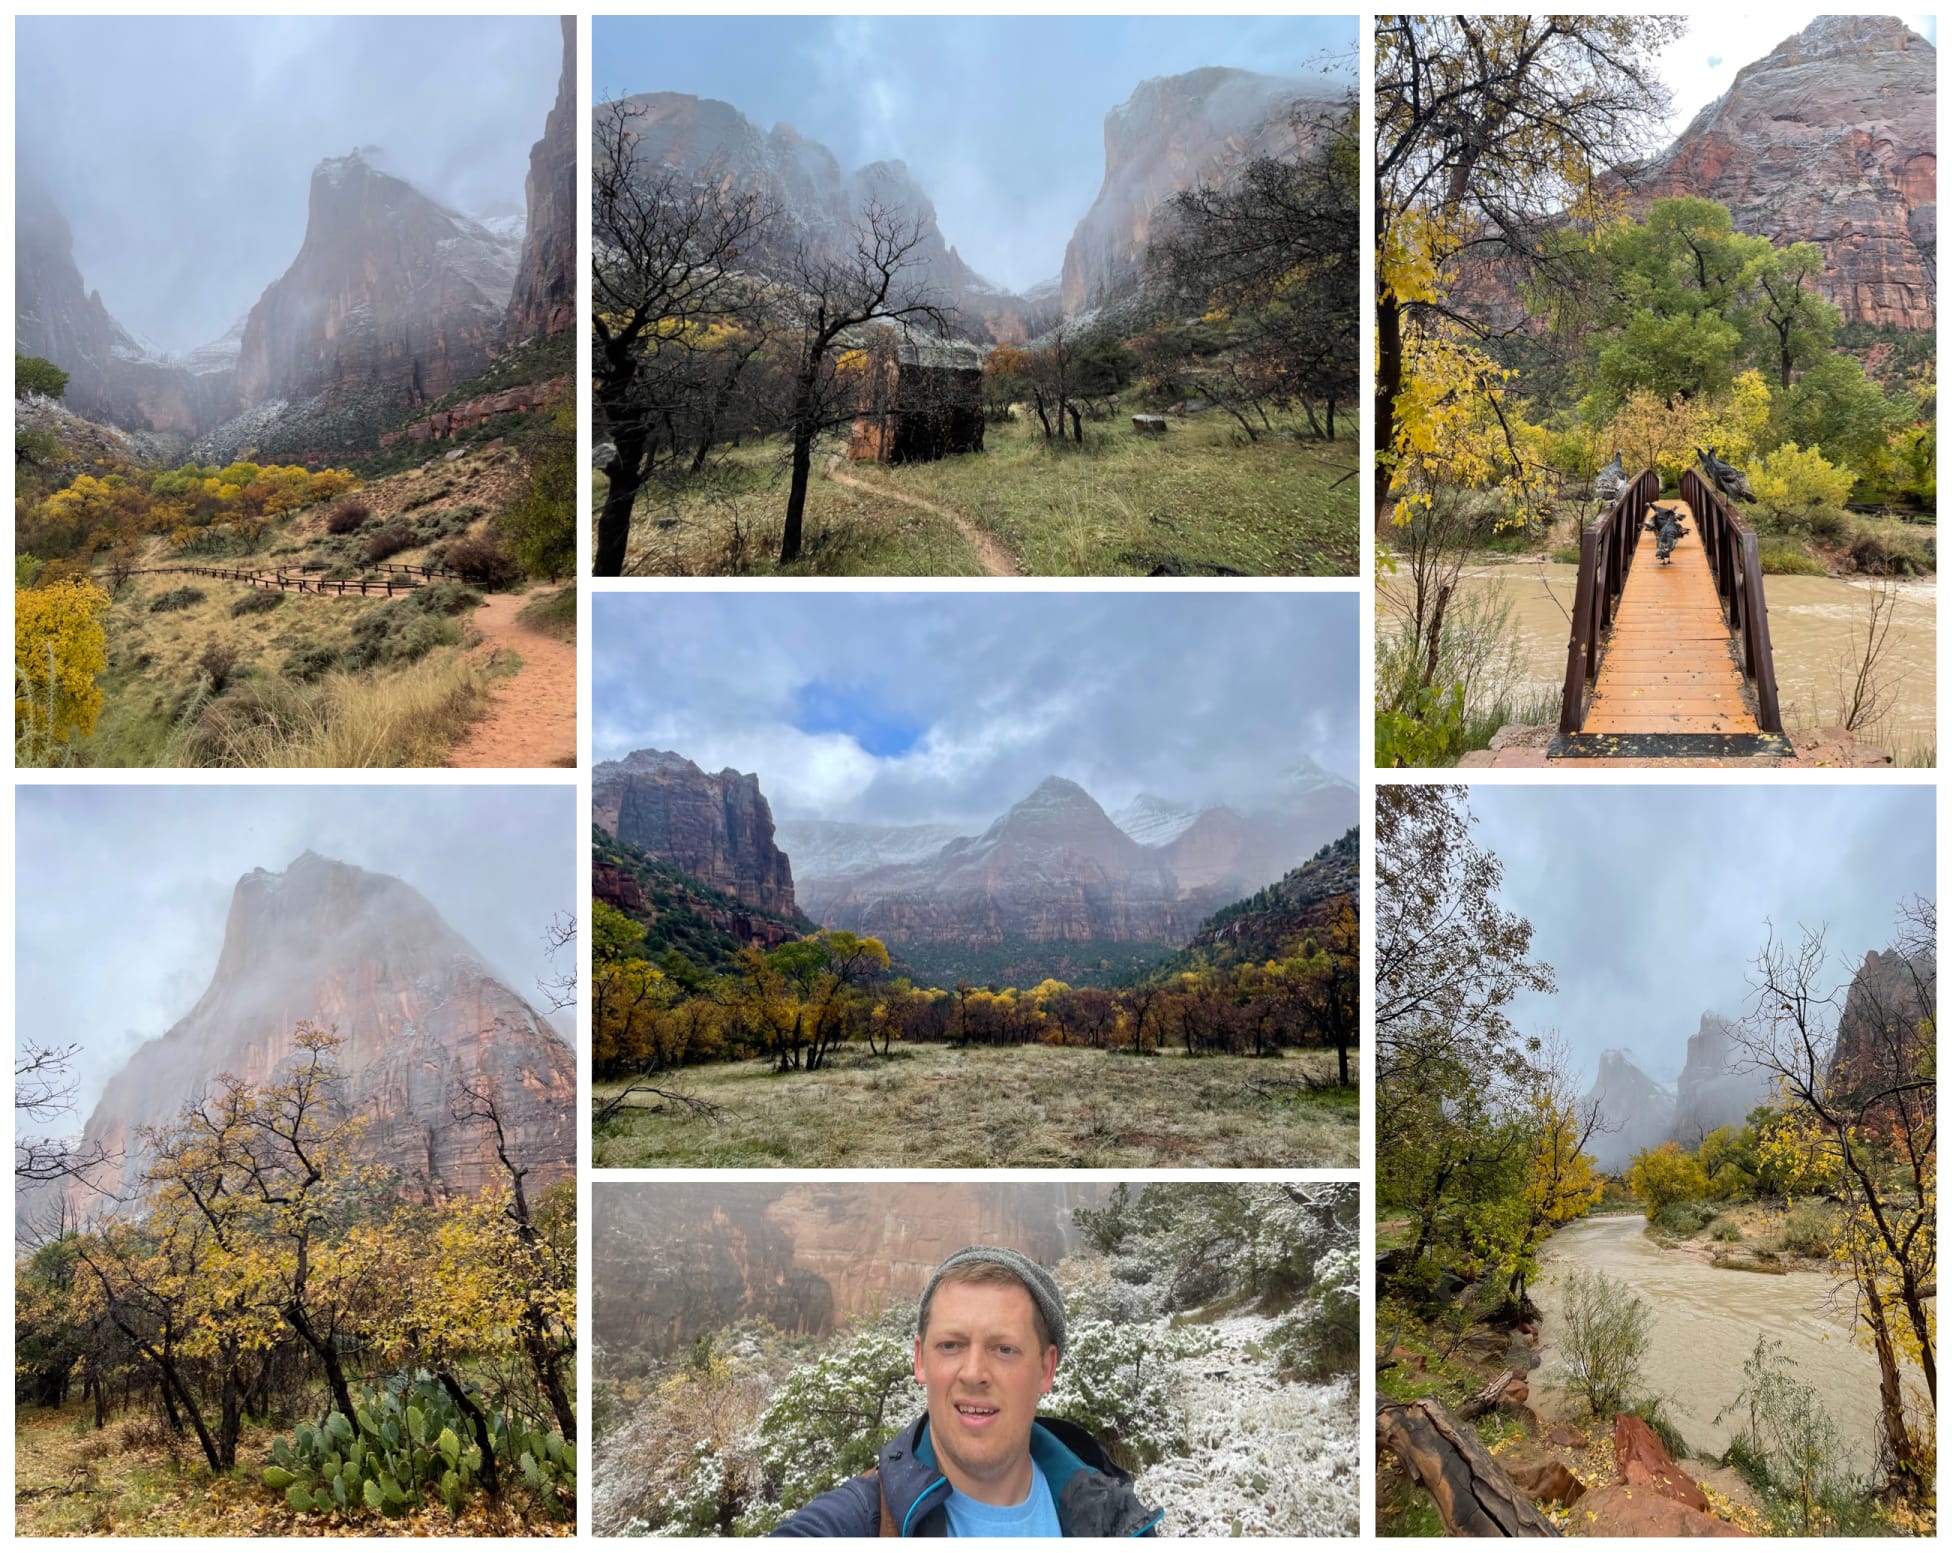 Collage of photographs from the Three Patriarchs hike in Zion National Park during the early winter with light snow and clouds.